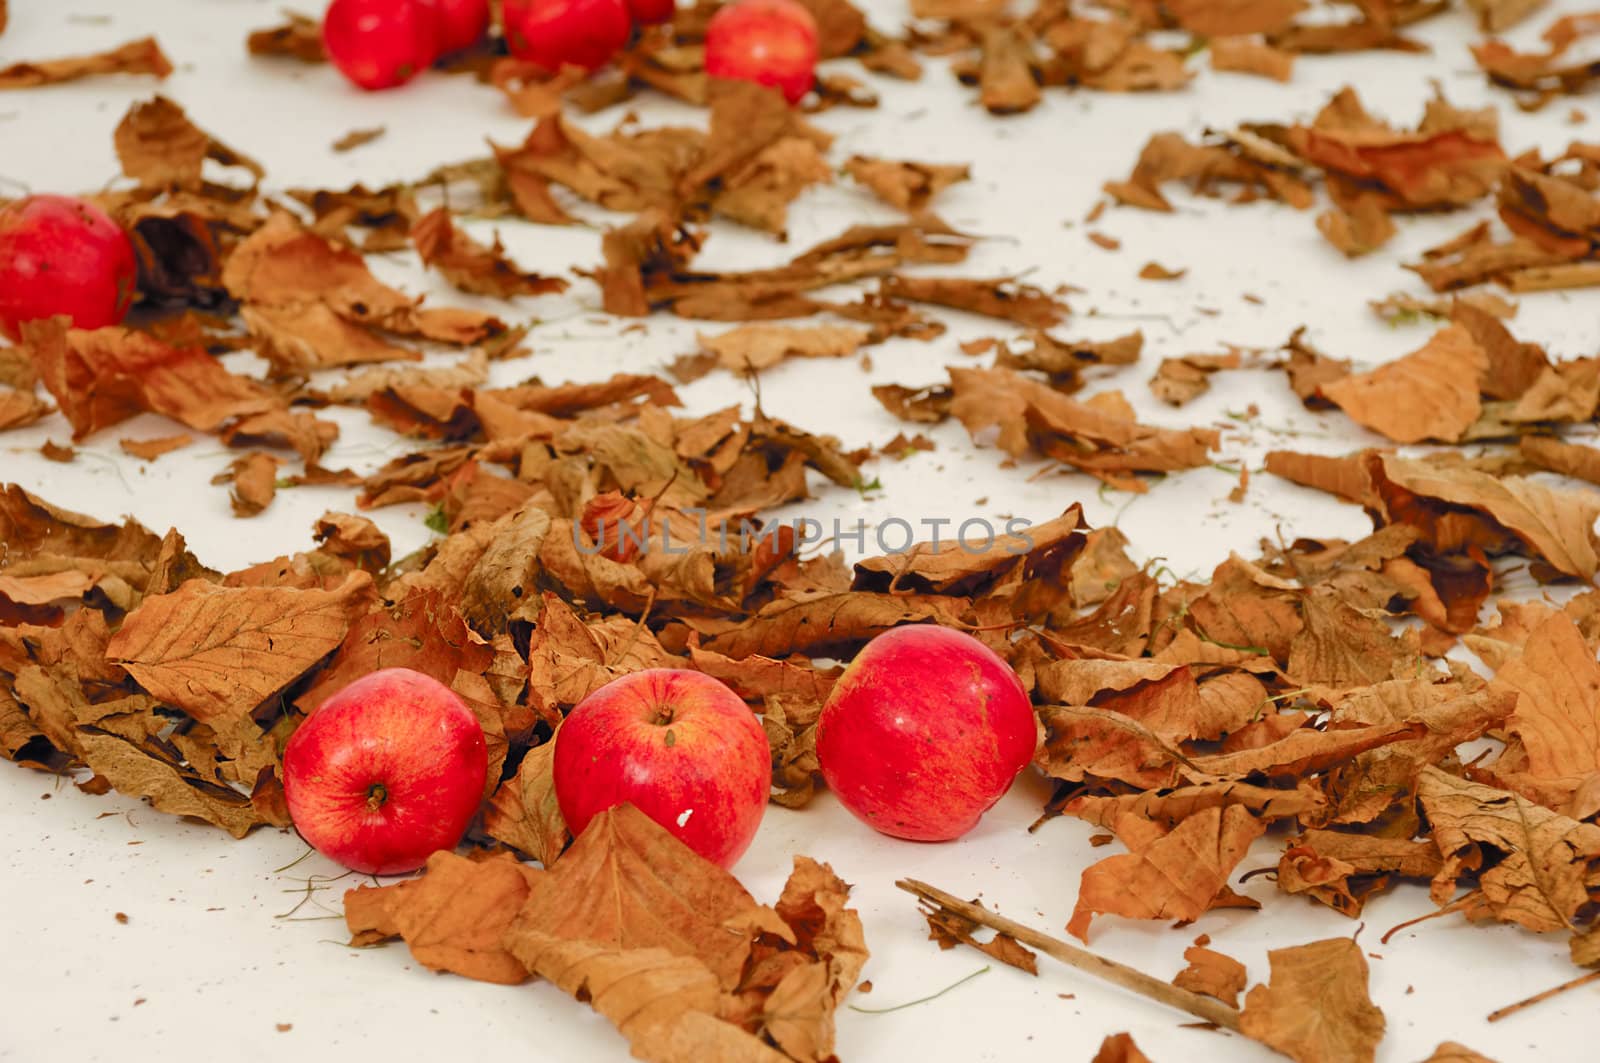 Red apples and old leafs. Studio shot.